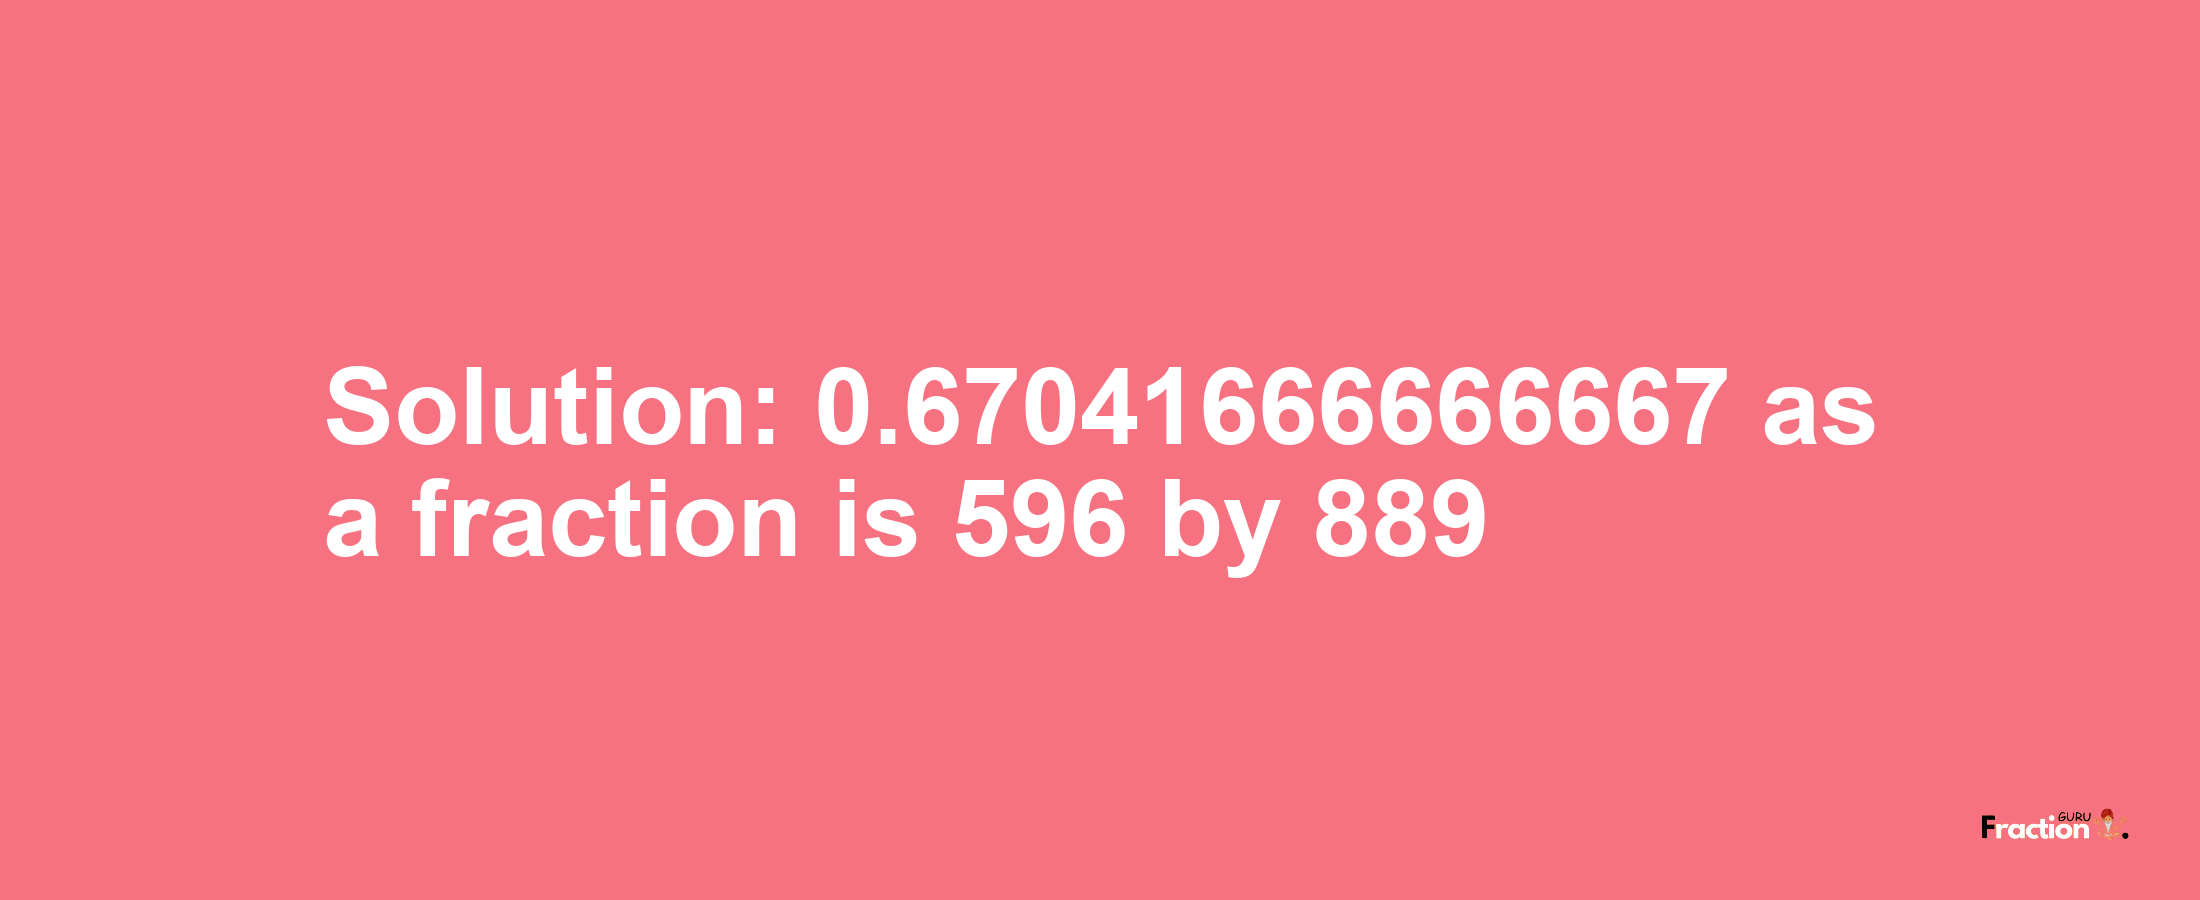 Solution:0.67041666666667 as a fraction is 596/889